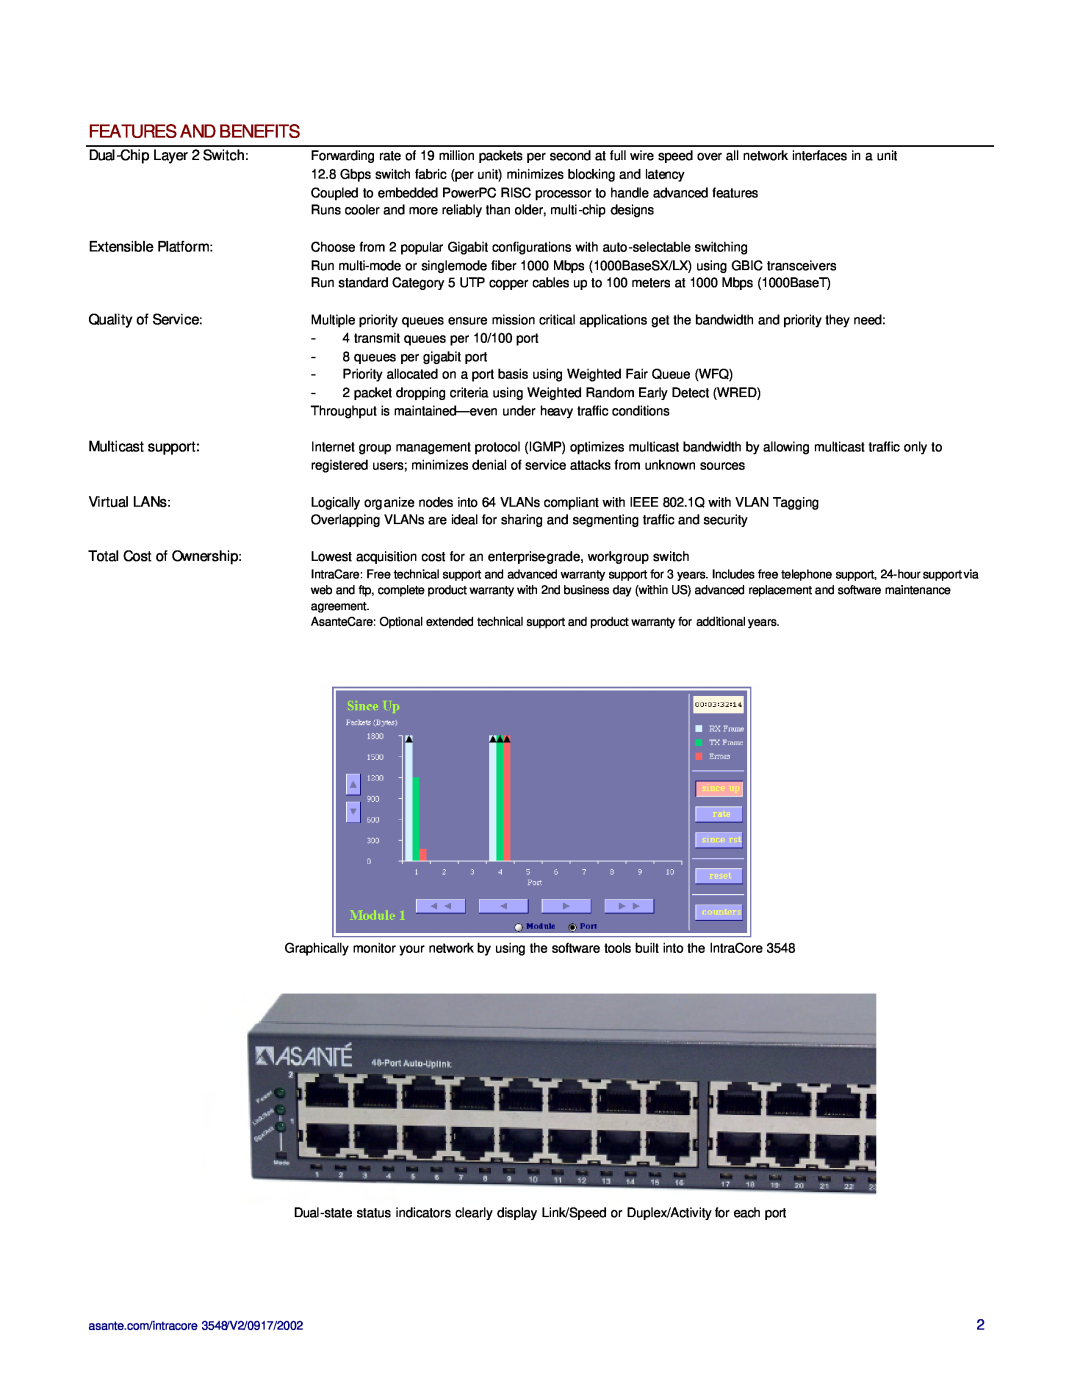 Asante Technologies 3548-2GT Series Features And Benefits, Dual-Chip Layer 2 Switch, Extensible Platform, Virtual LANs 